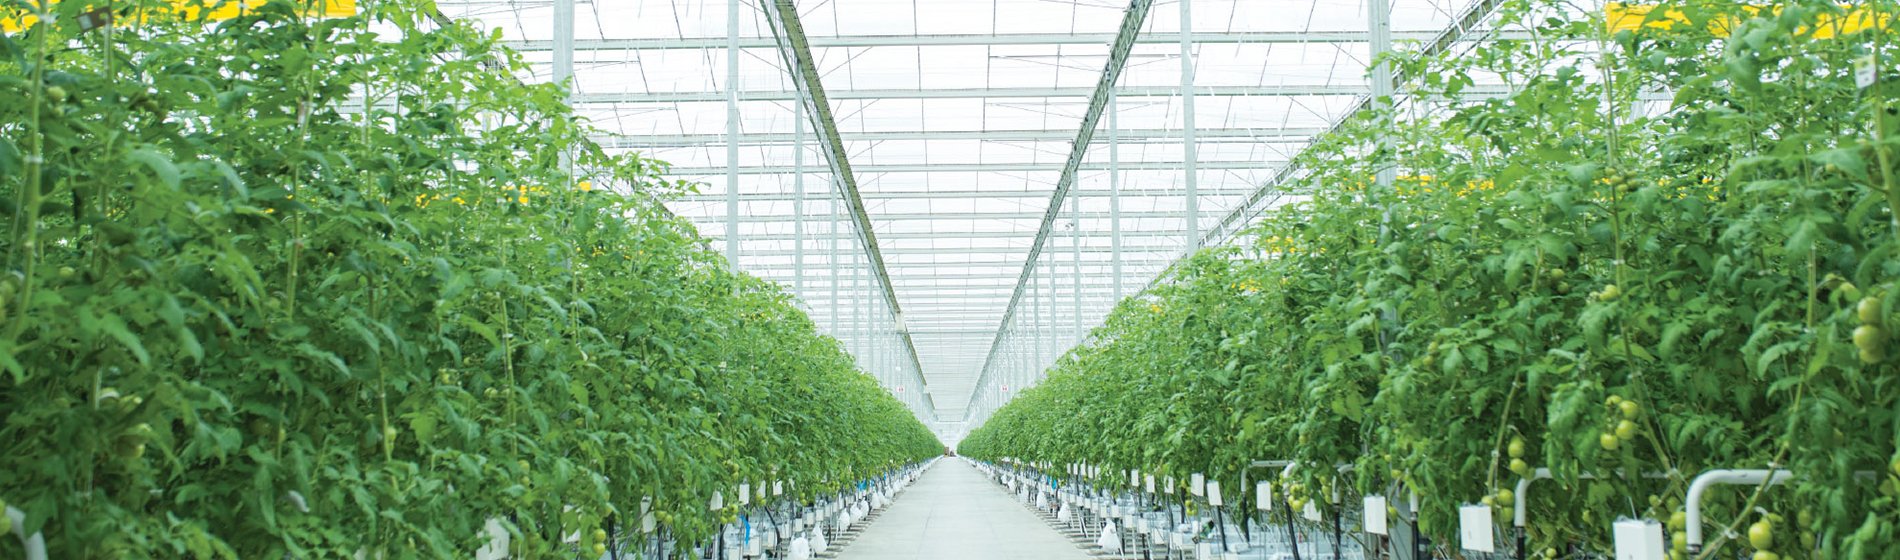 Rows of tomato plants growing in a greenhouse